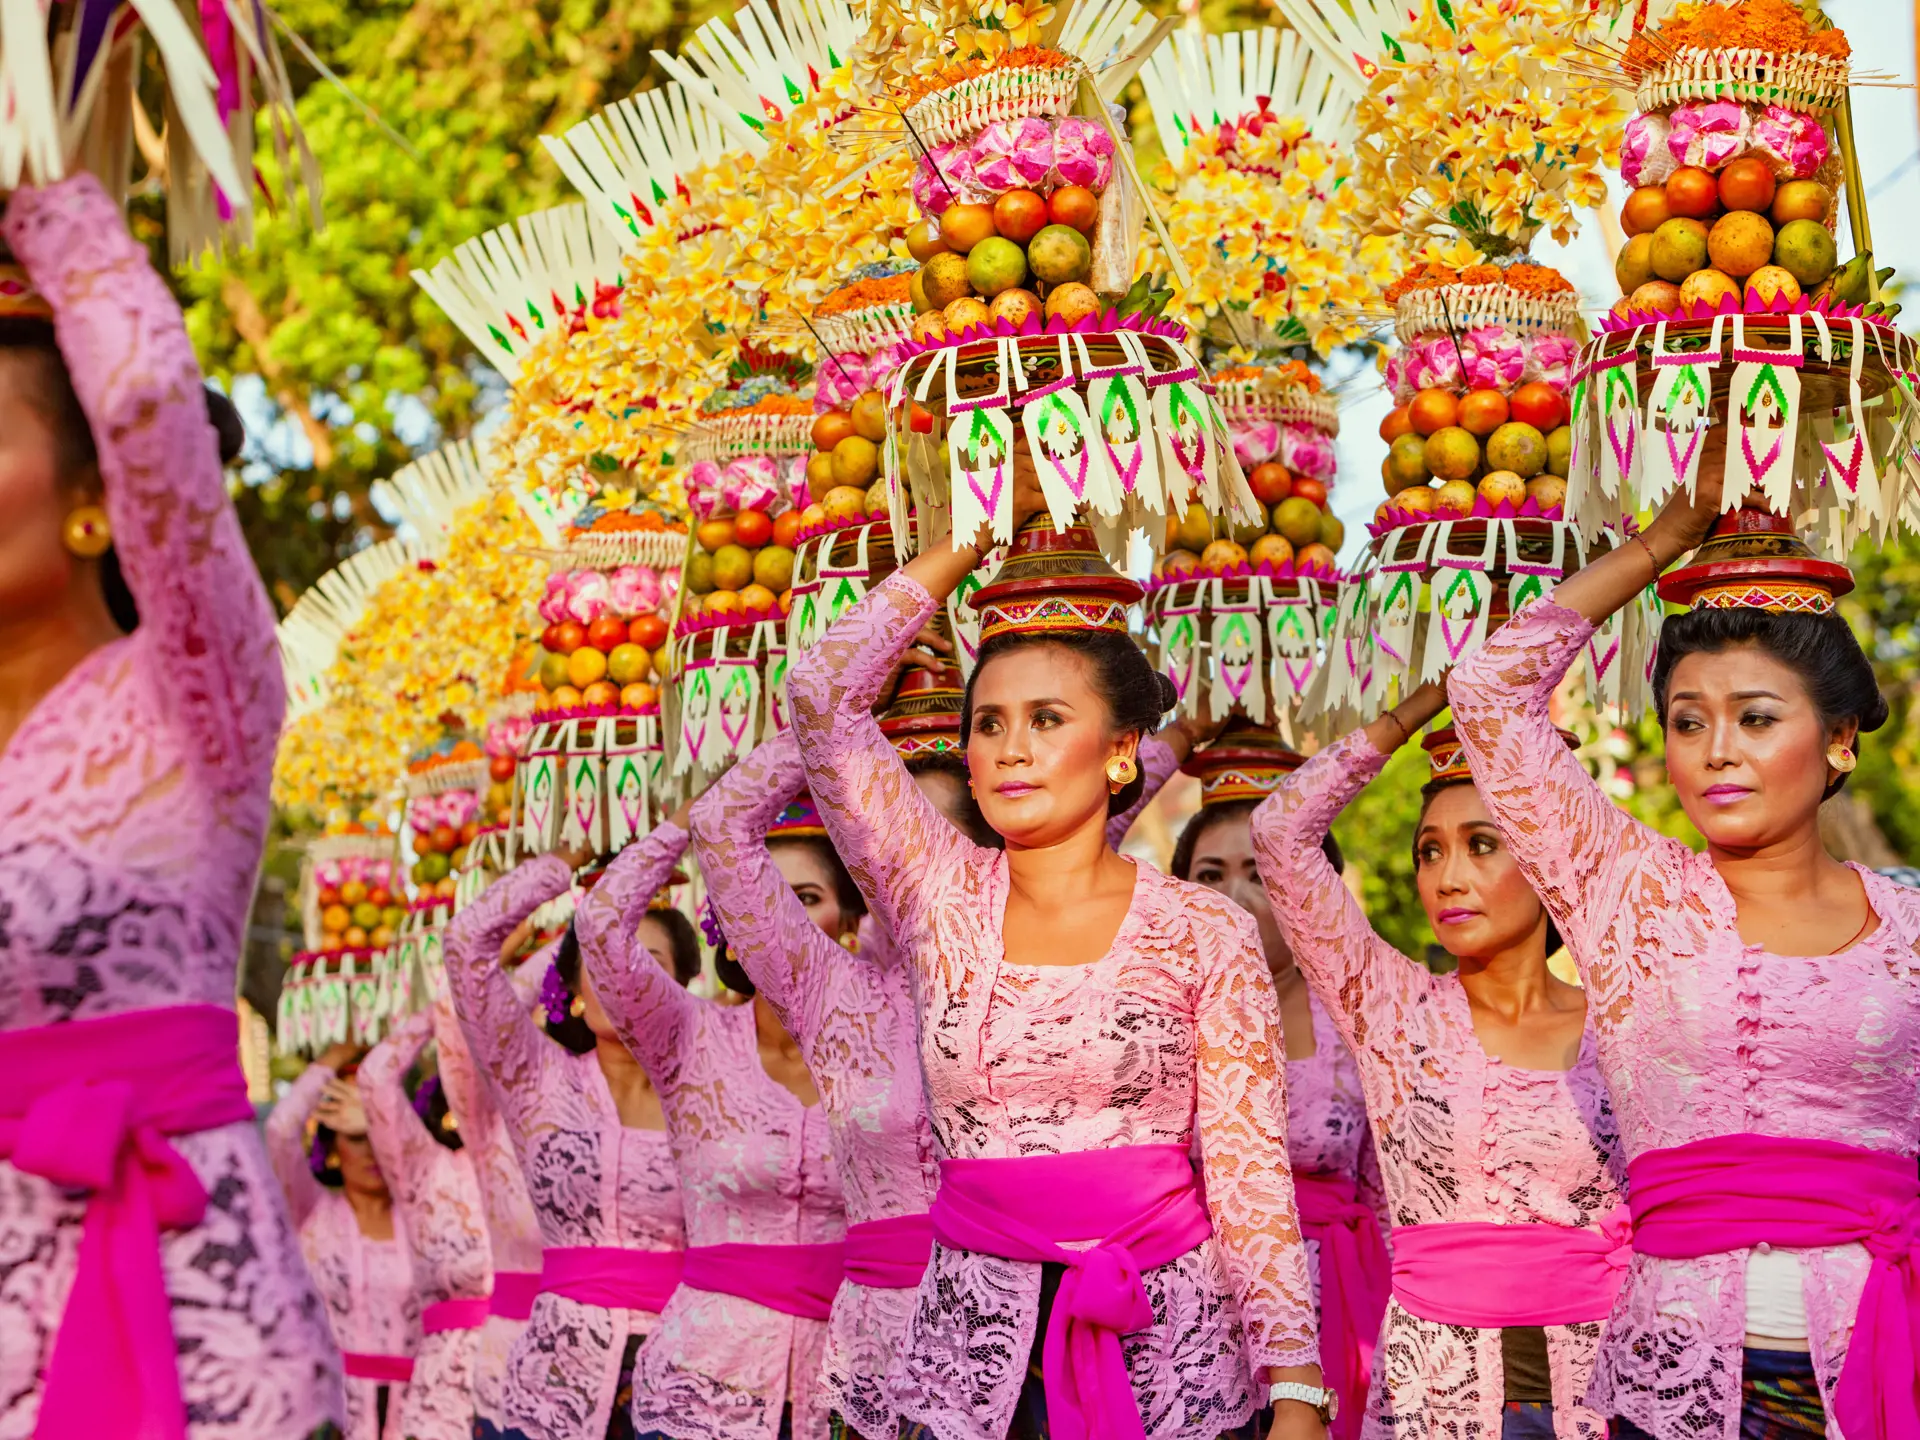 shutterstock_598802501 DENPASAR, BALI women in traditional Balinese costumes carry on head religious offering for hindu ceremony on parade at art and culture festival..jpg